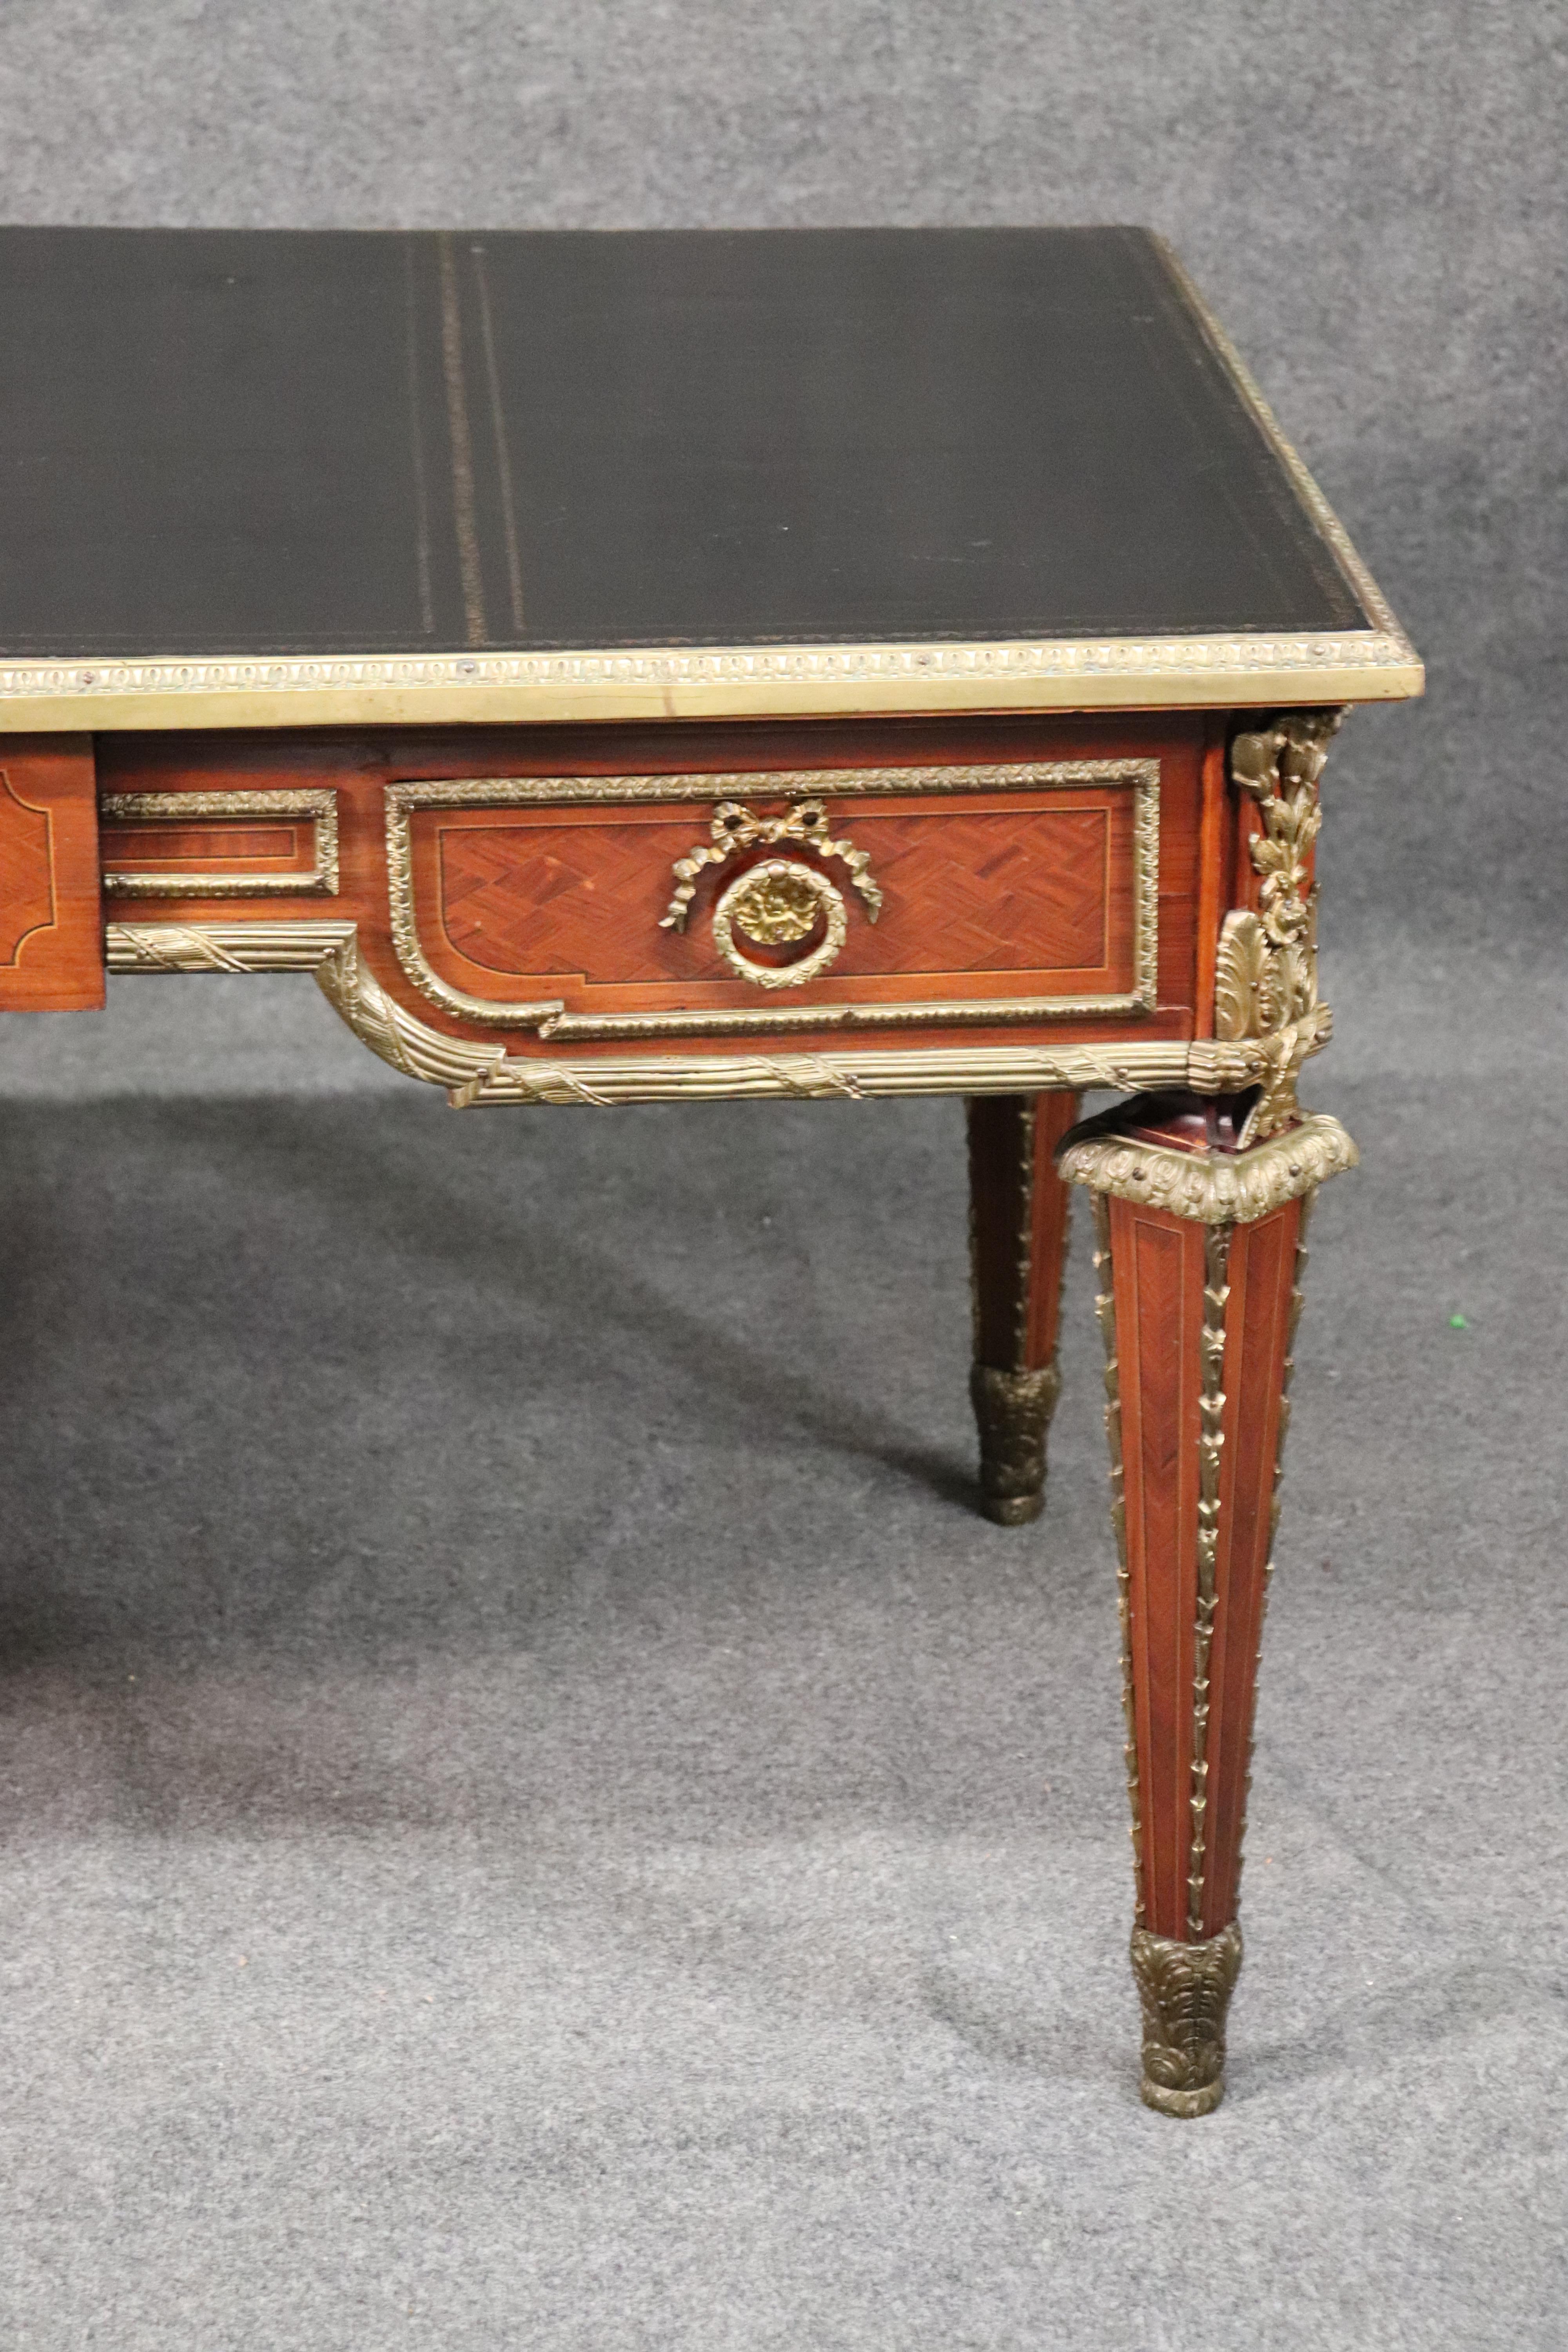 This is a stunning desk with superb quality bronze mounts and a fantastic black leather top, circa 1930. The desk is in gorgeous condition for its age and is a very unique form and design. This is one of the finest of its type we have had in a